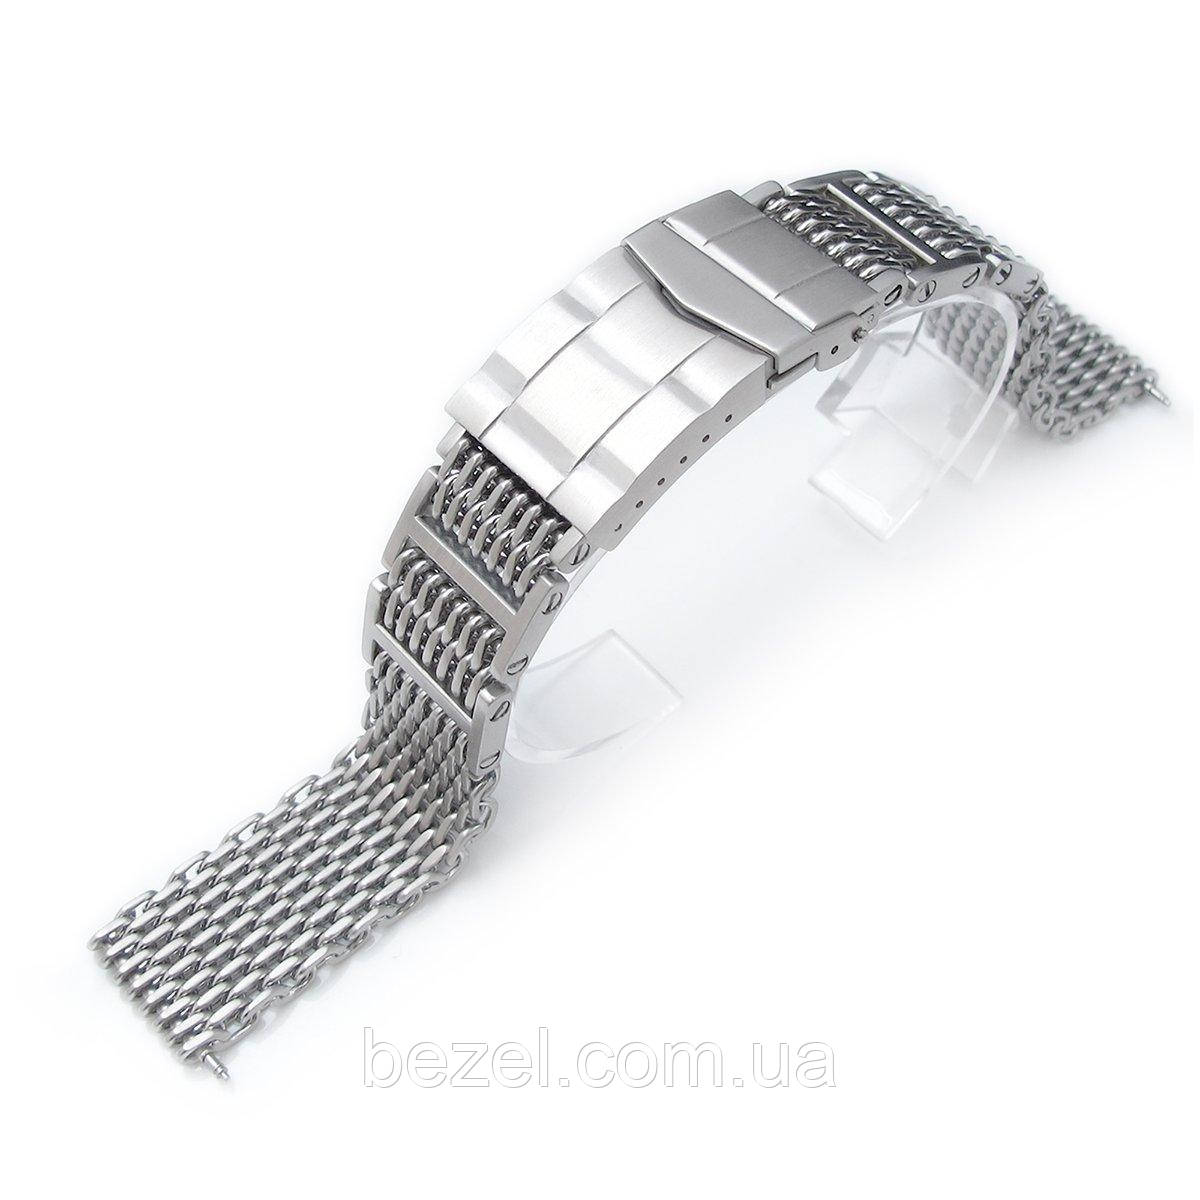 19mm or 20mm Flexi Ploprof 316 Reform SHARK Mesh Band, 316L Stainless Steel, Submariner Diver Clasp, B